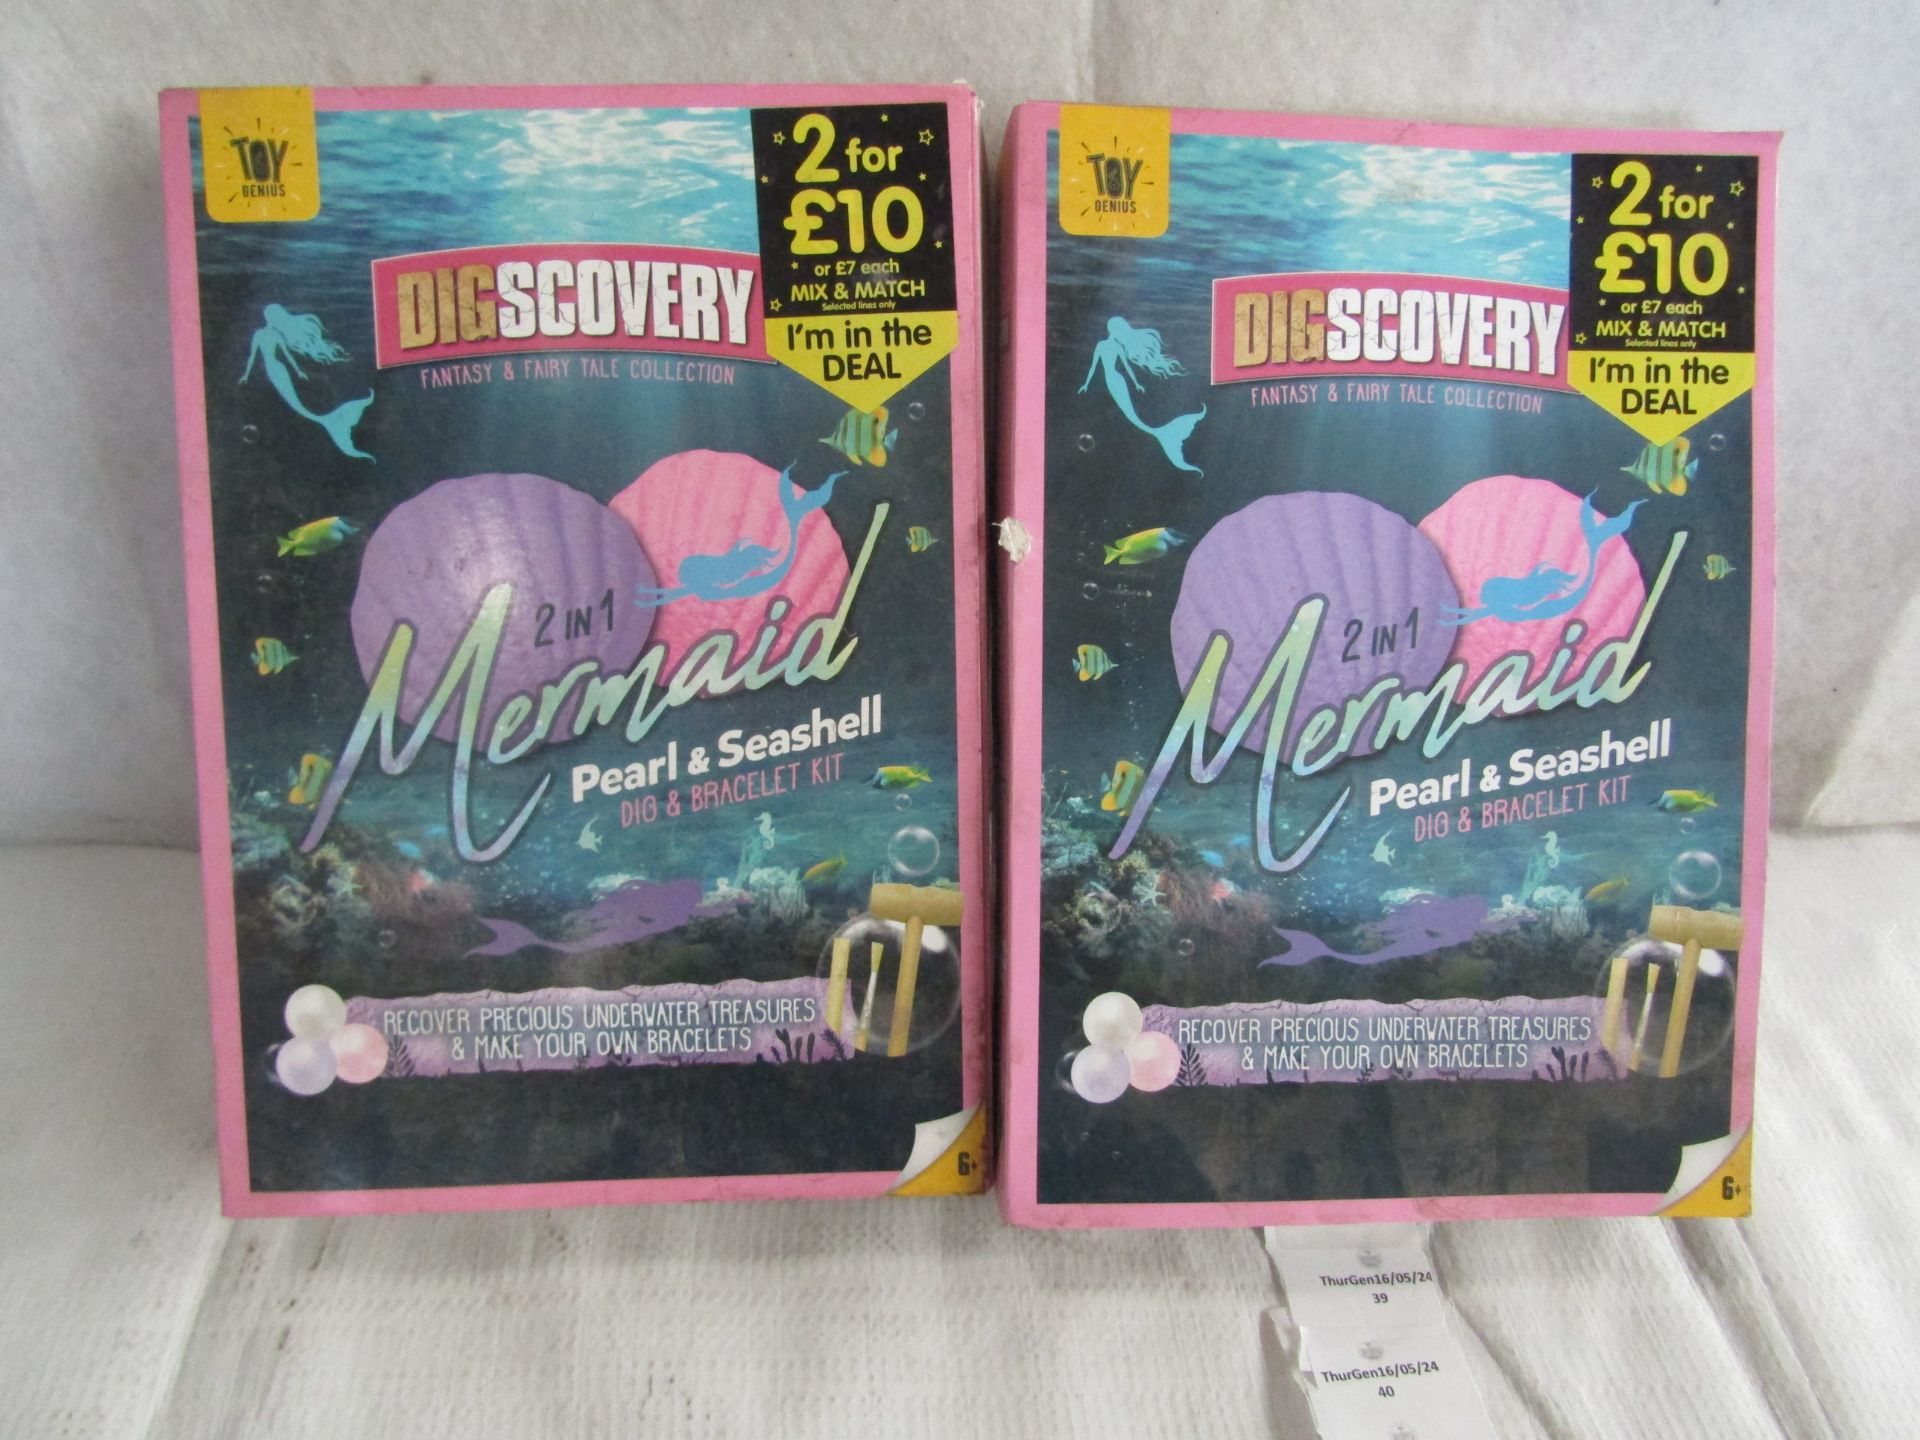 2x Digscovery - 2-In-1 Mermaid Pearl & Shell Dig & Bracelet Kit - Unchecked & Boxed.